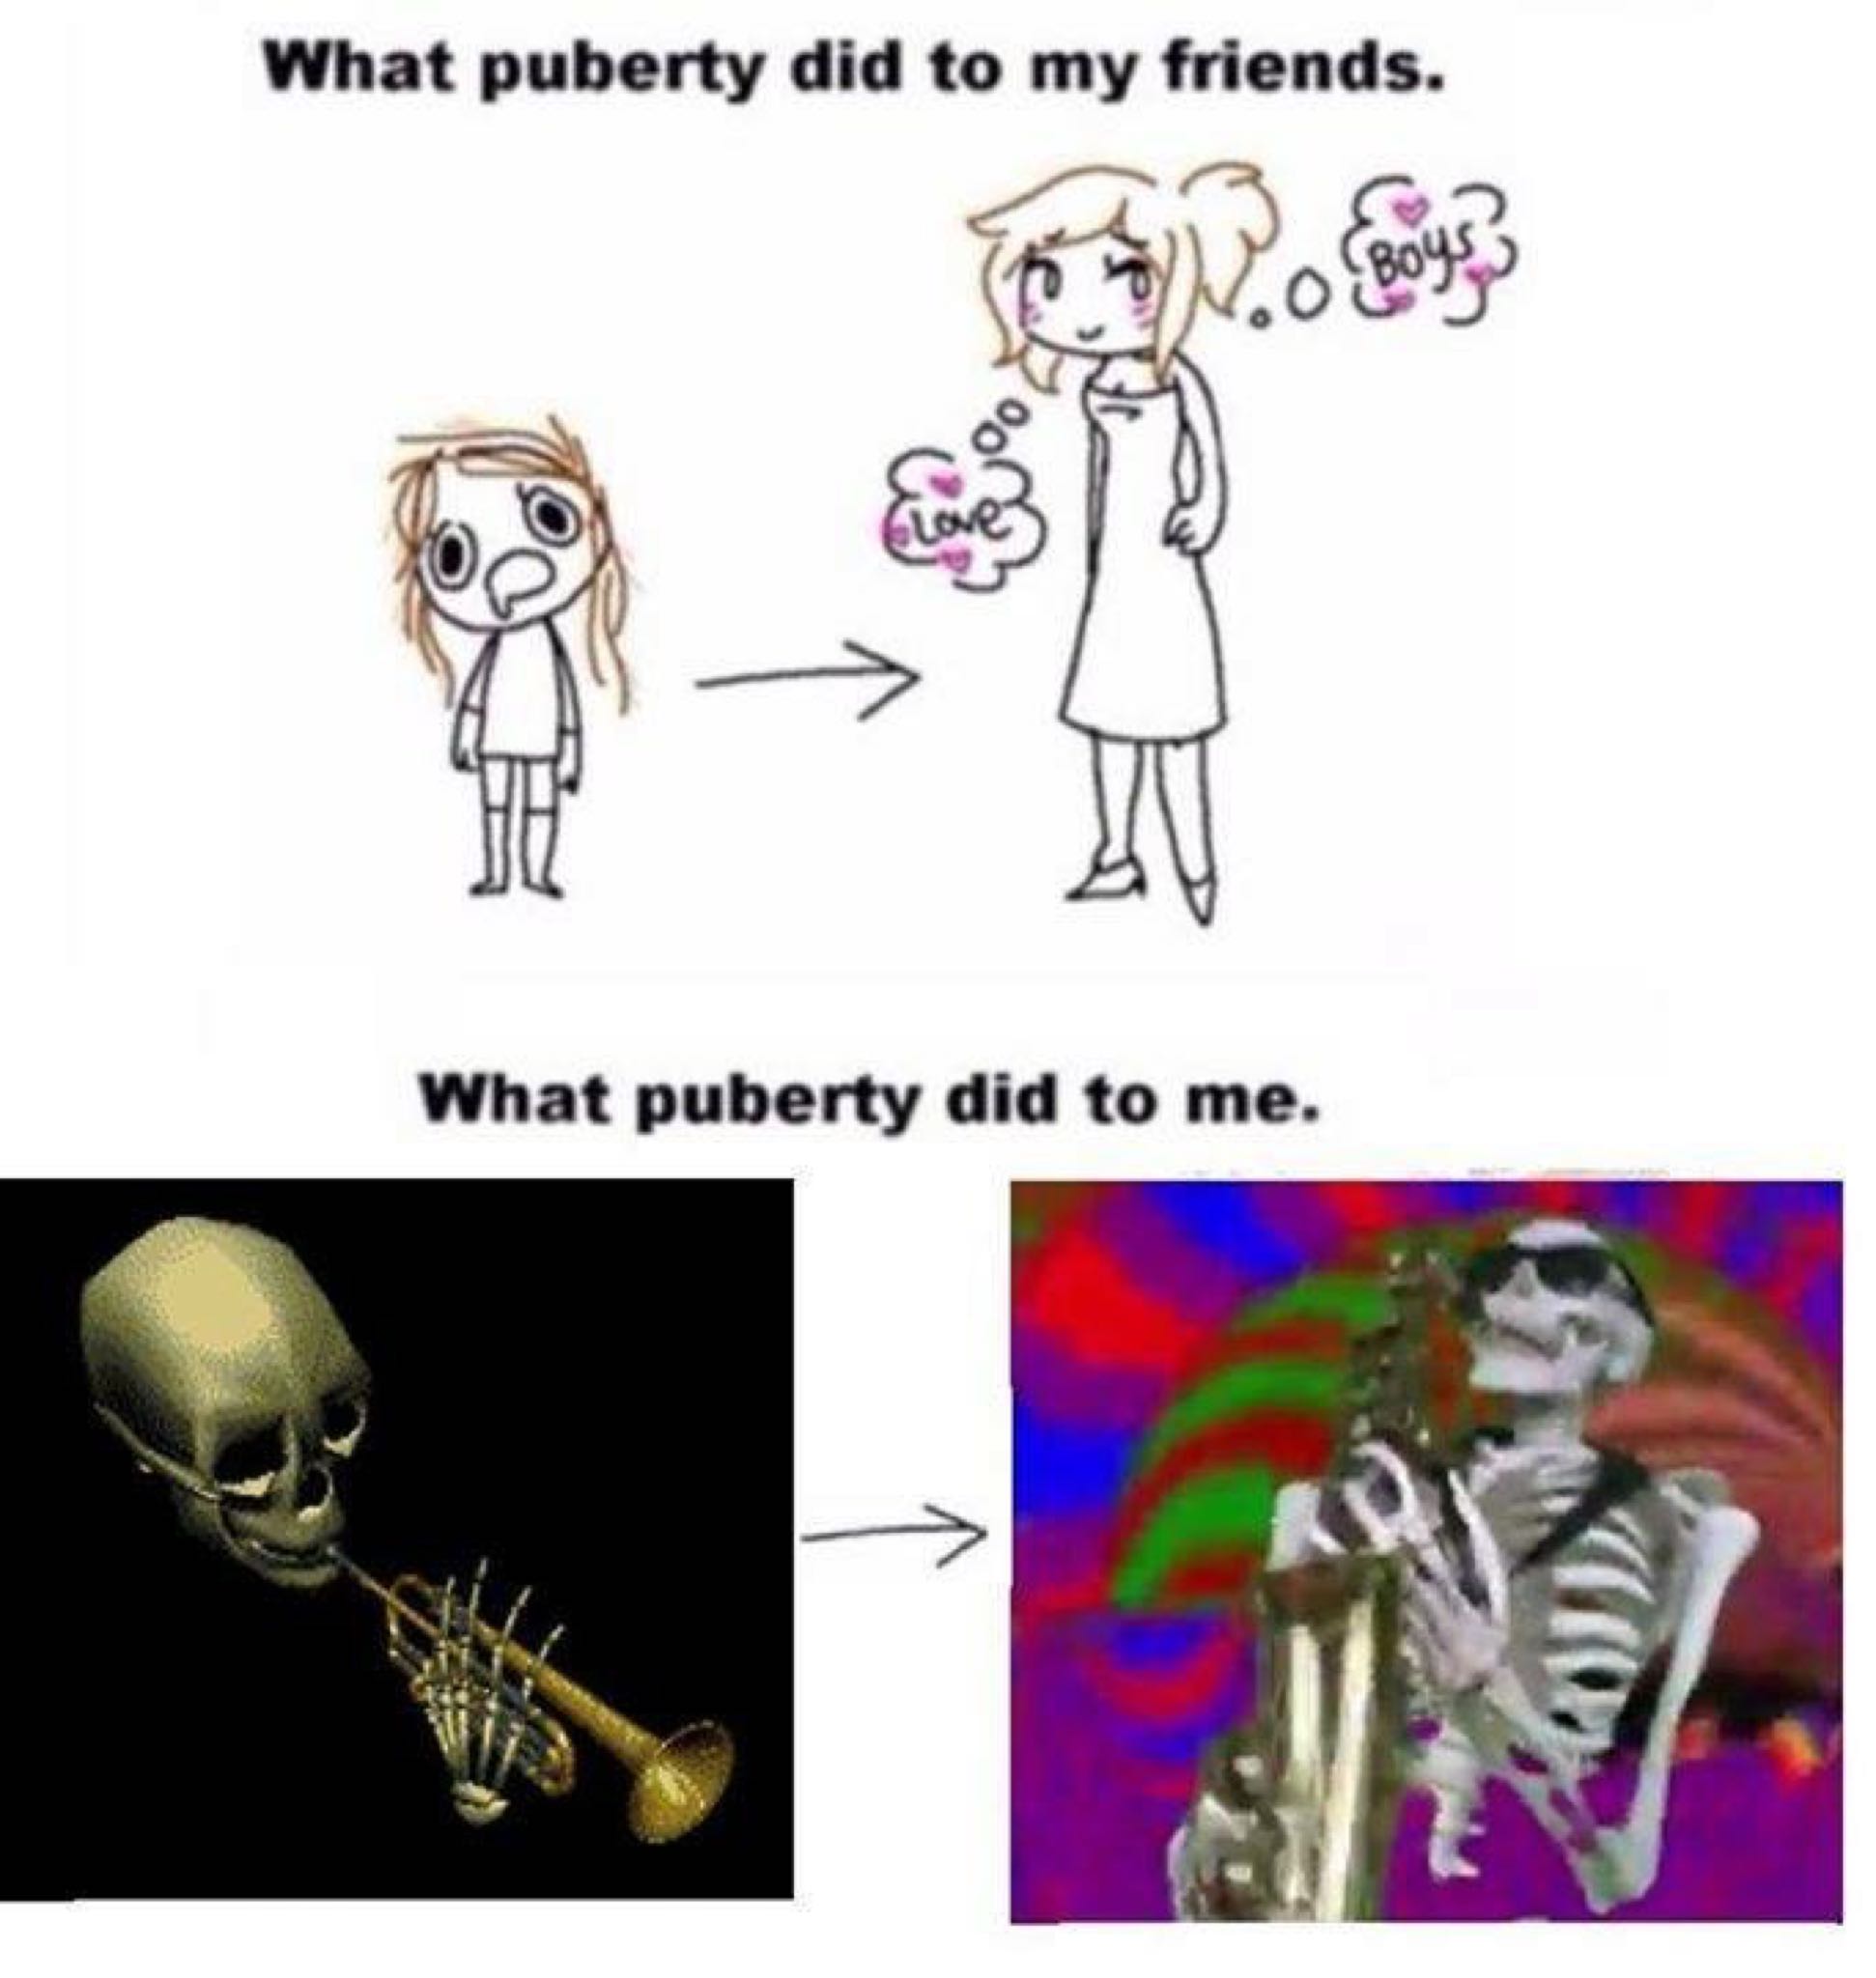 Dank meme about how some people do not do too well with puberty.